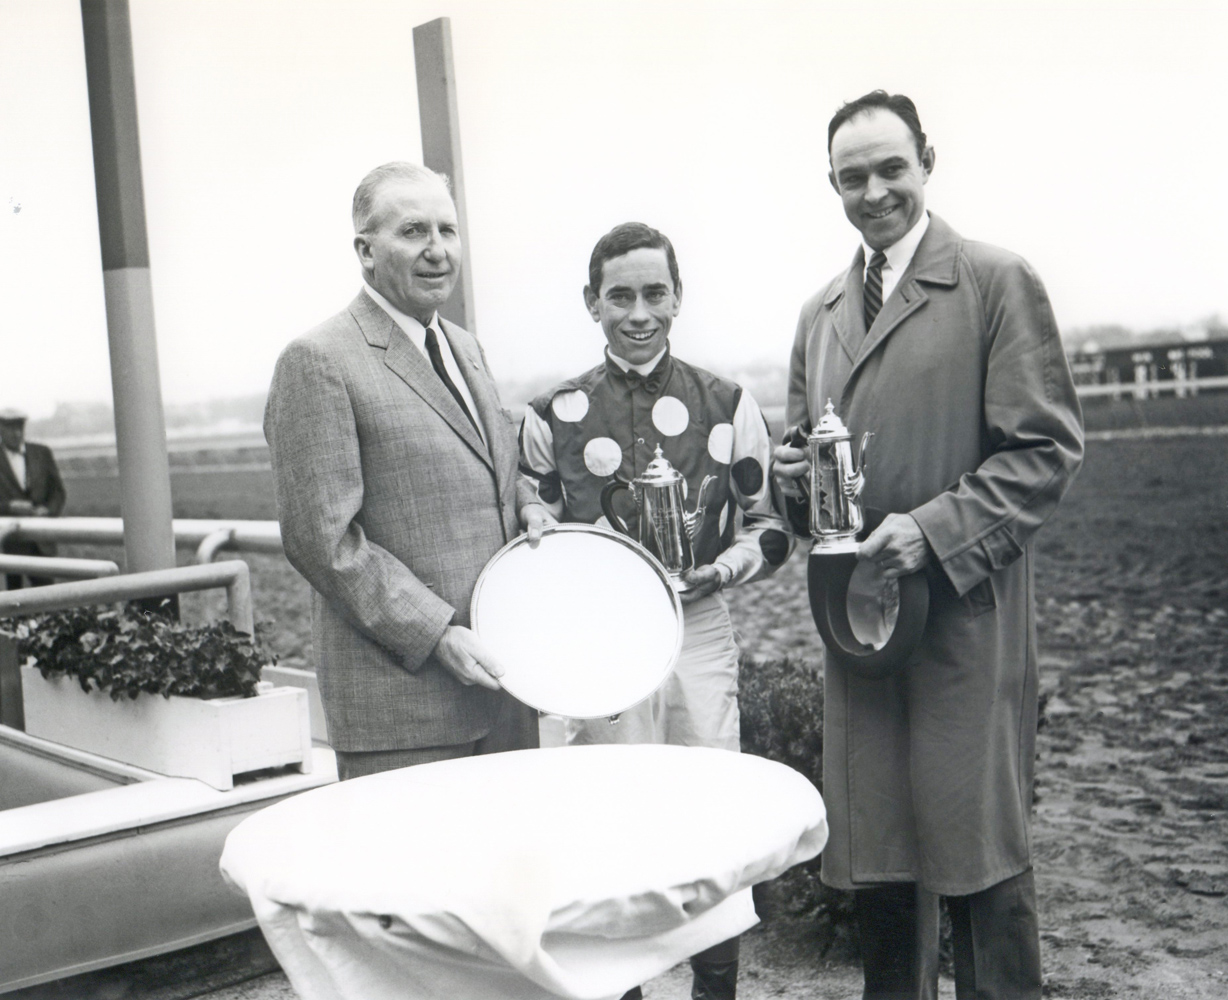 Jockey John Rotz and trainer T. J. Kelly at the trophy presentation for the 1961 Wood Memorial, won by Globemaster (Keeneland Library Morgan Collection/Museum Collection)